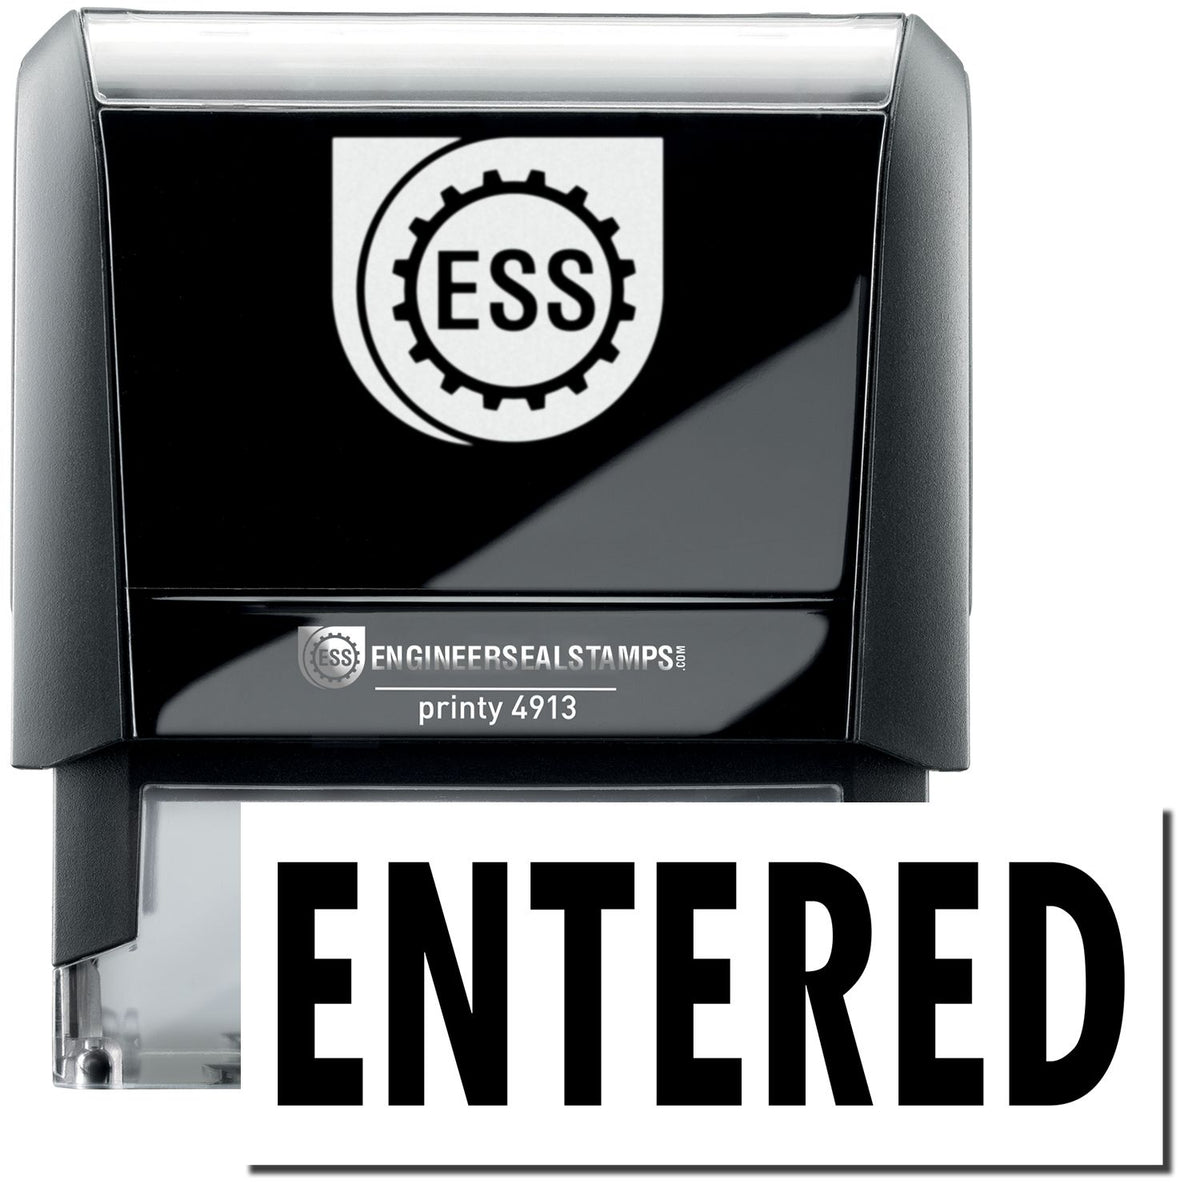 A self-inking stamp with a stamped image showing how the text &quot;ENTERED&quot; in a large bold font is displayed by it.